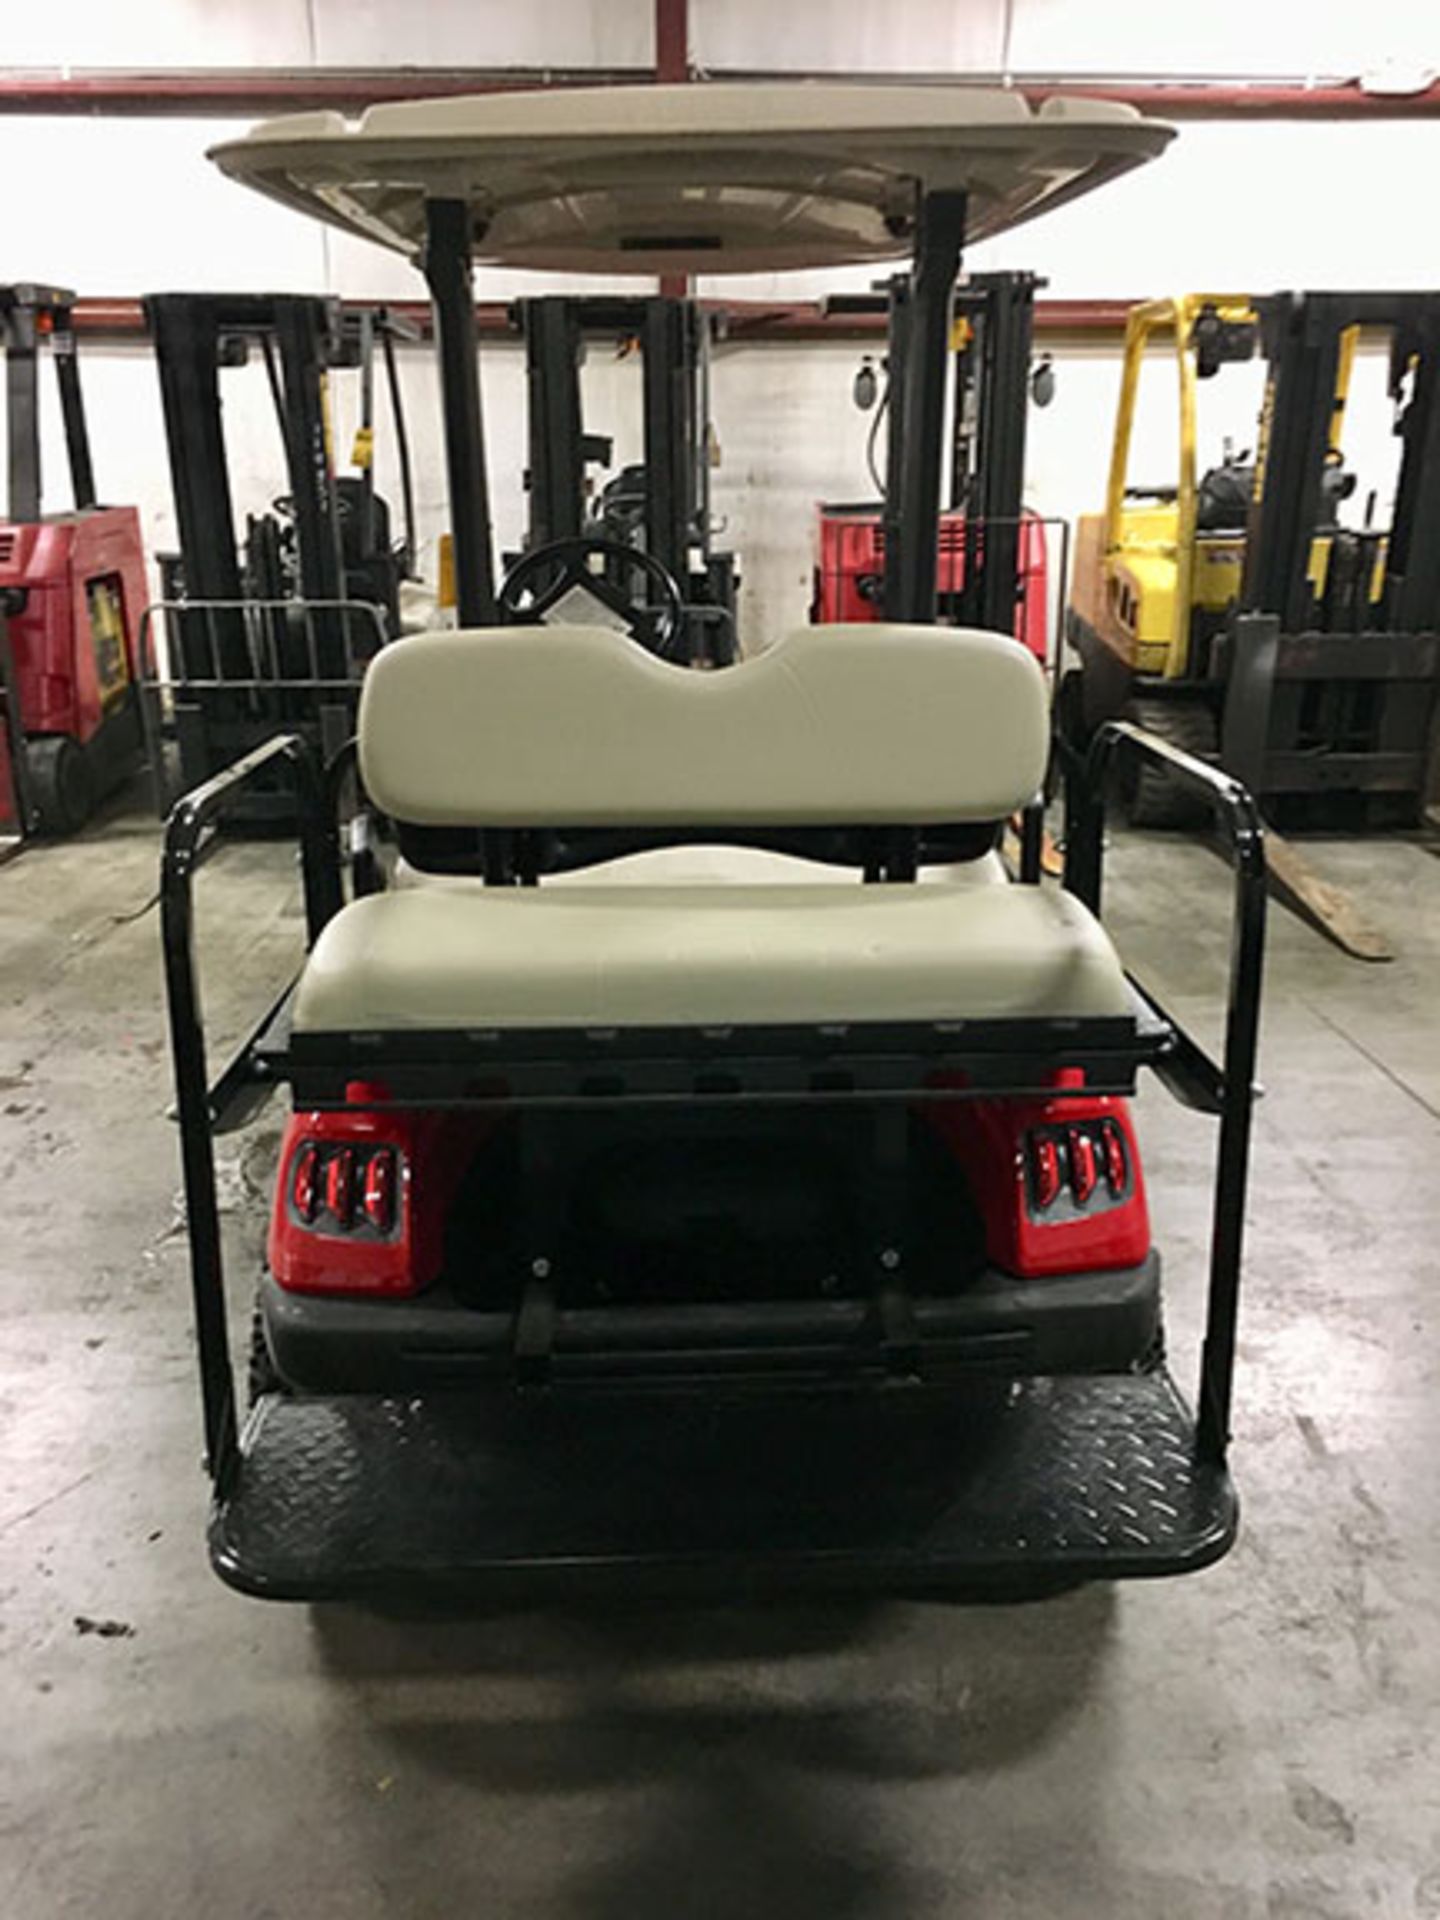 2009 YAMAHA ELECTRIC GOLF CART, WITH 48 VOLT CHARGER, 4-PASSENGER FOLD DOWN SEAT, LIFT KIT, - Image 2 of 5